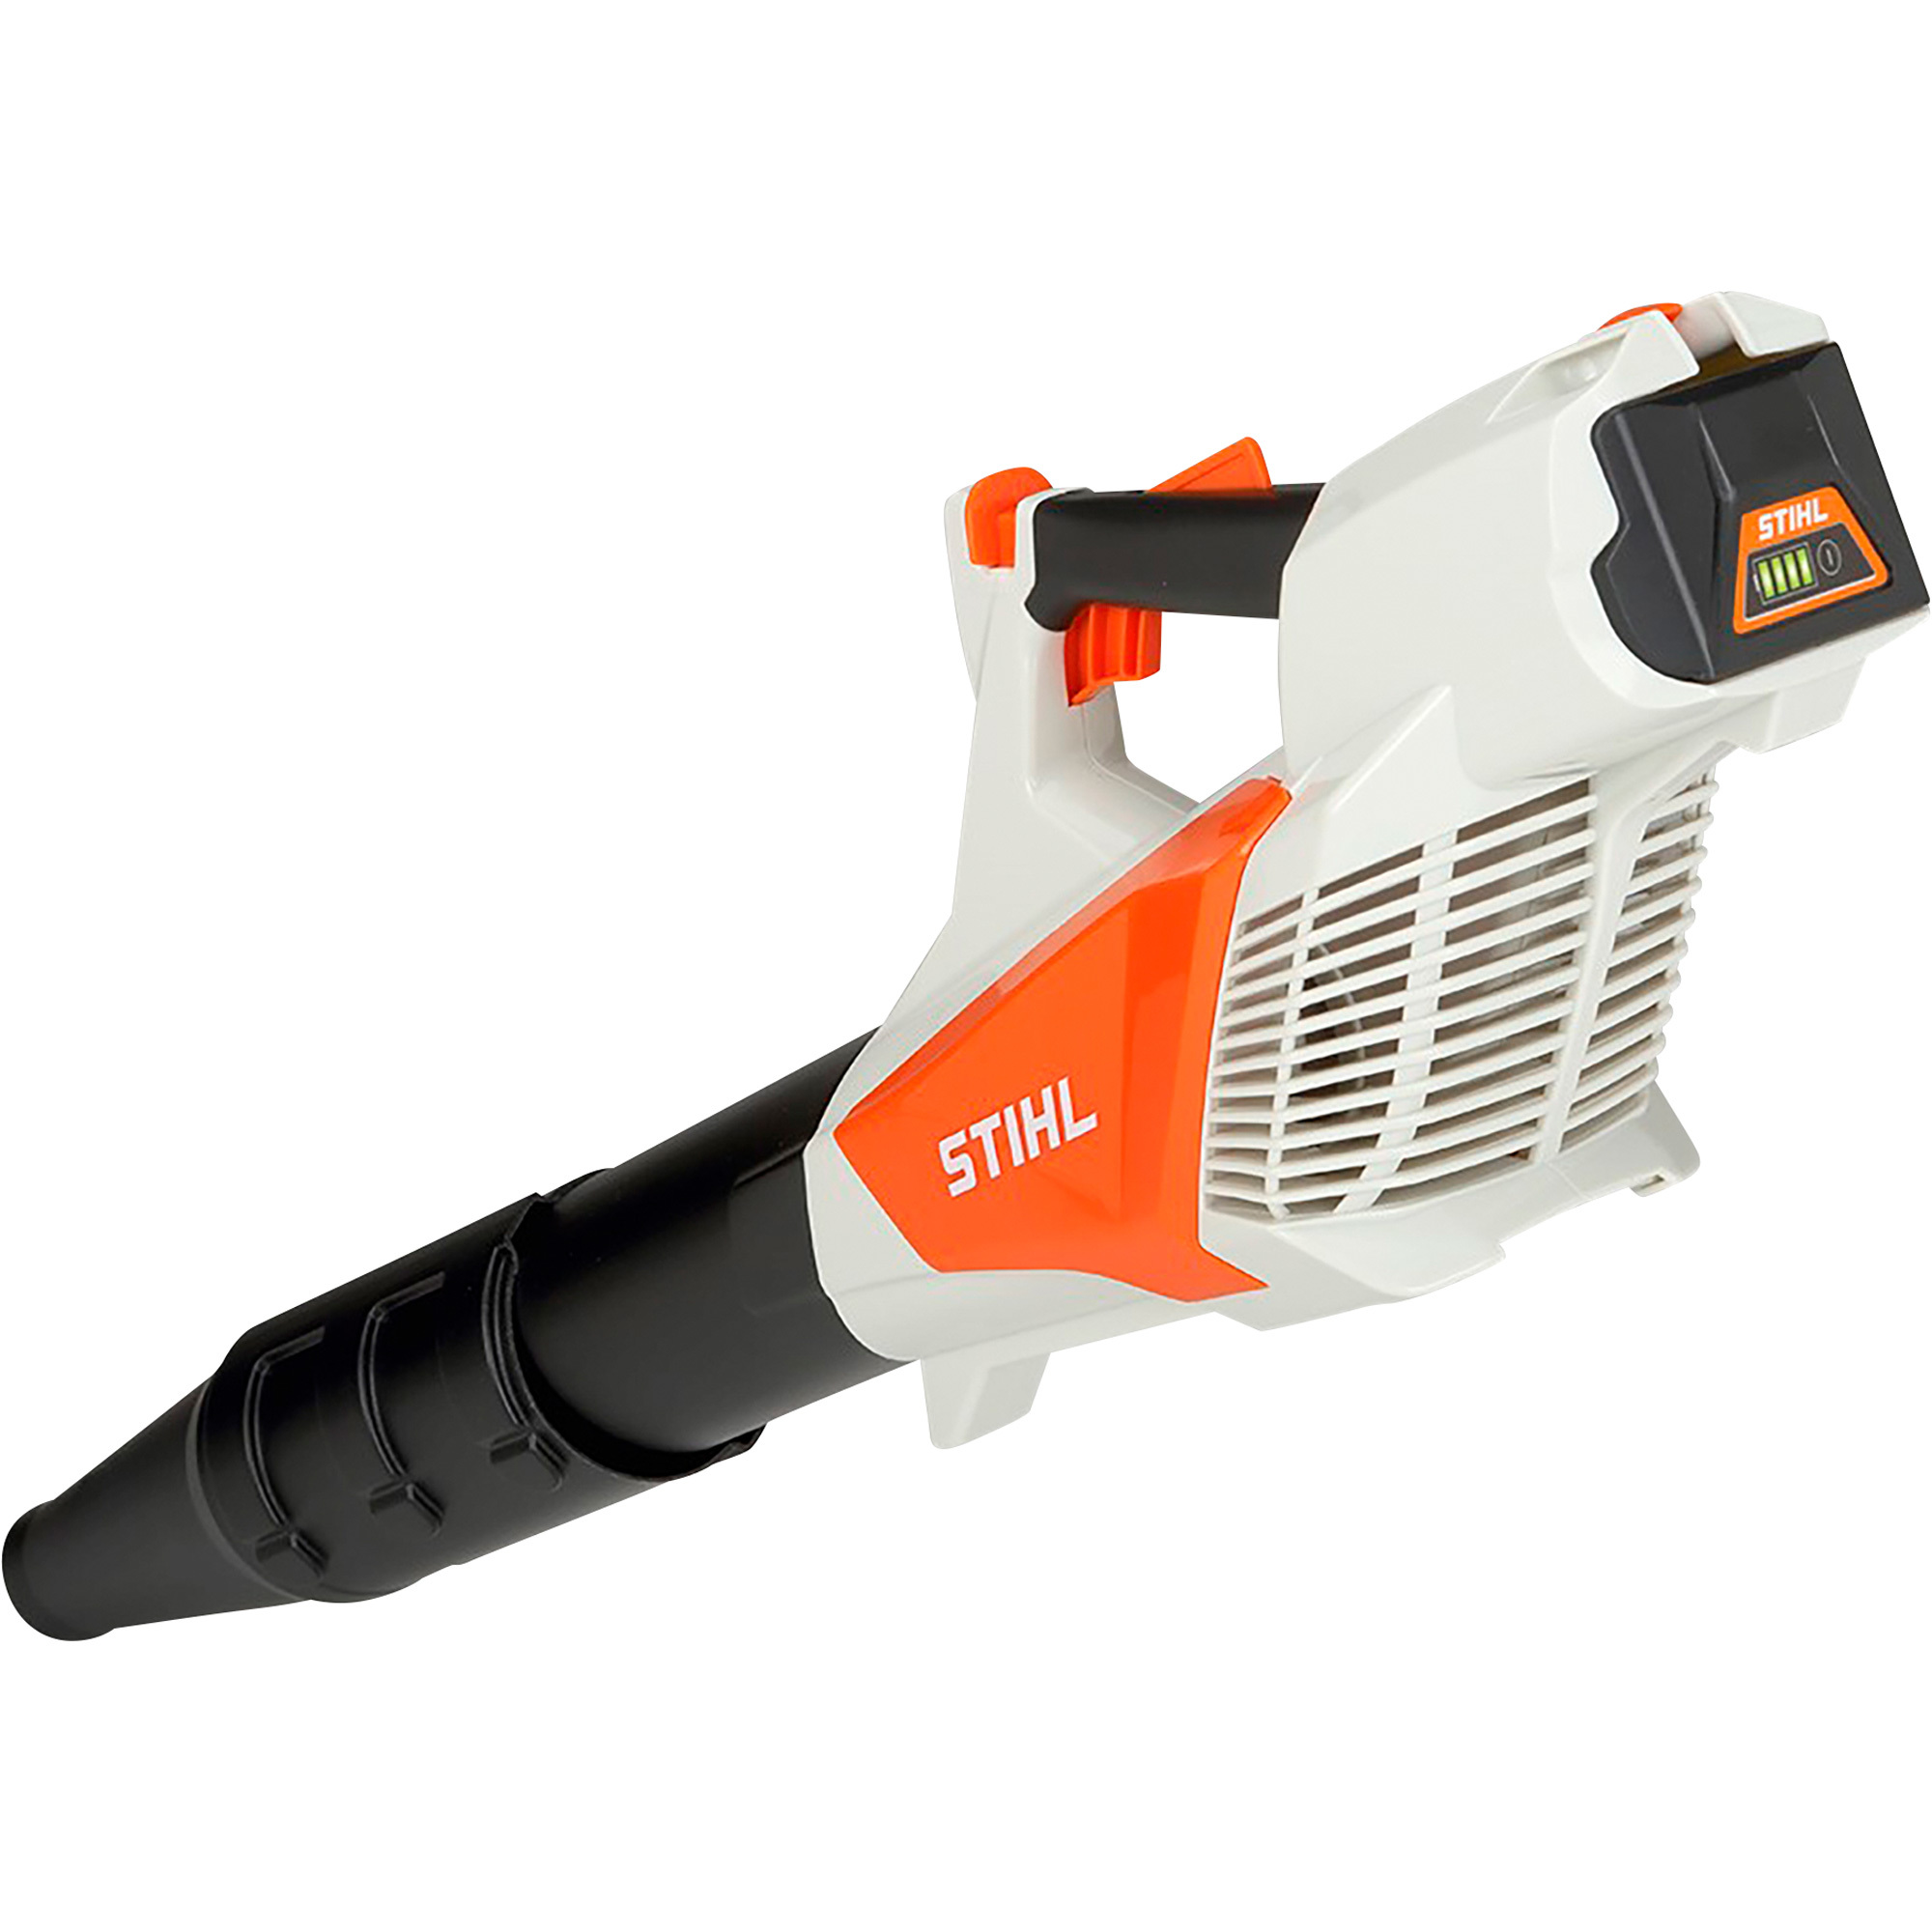 STIHL Battery-Operated Children's Toy Blower â Model 7010 871 7544